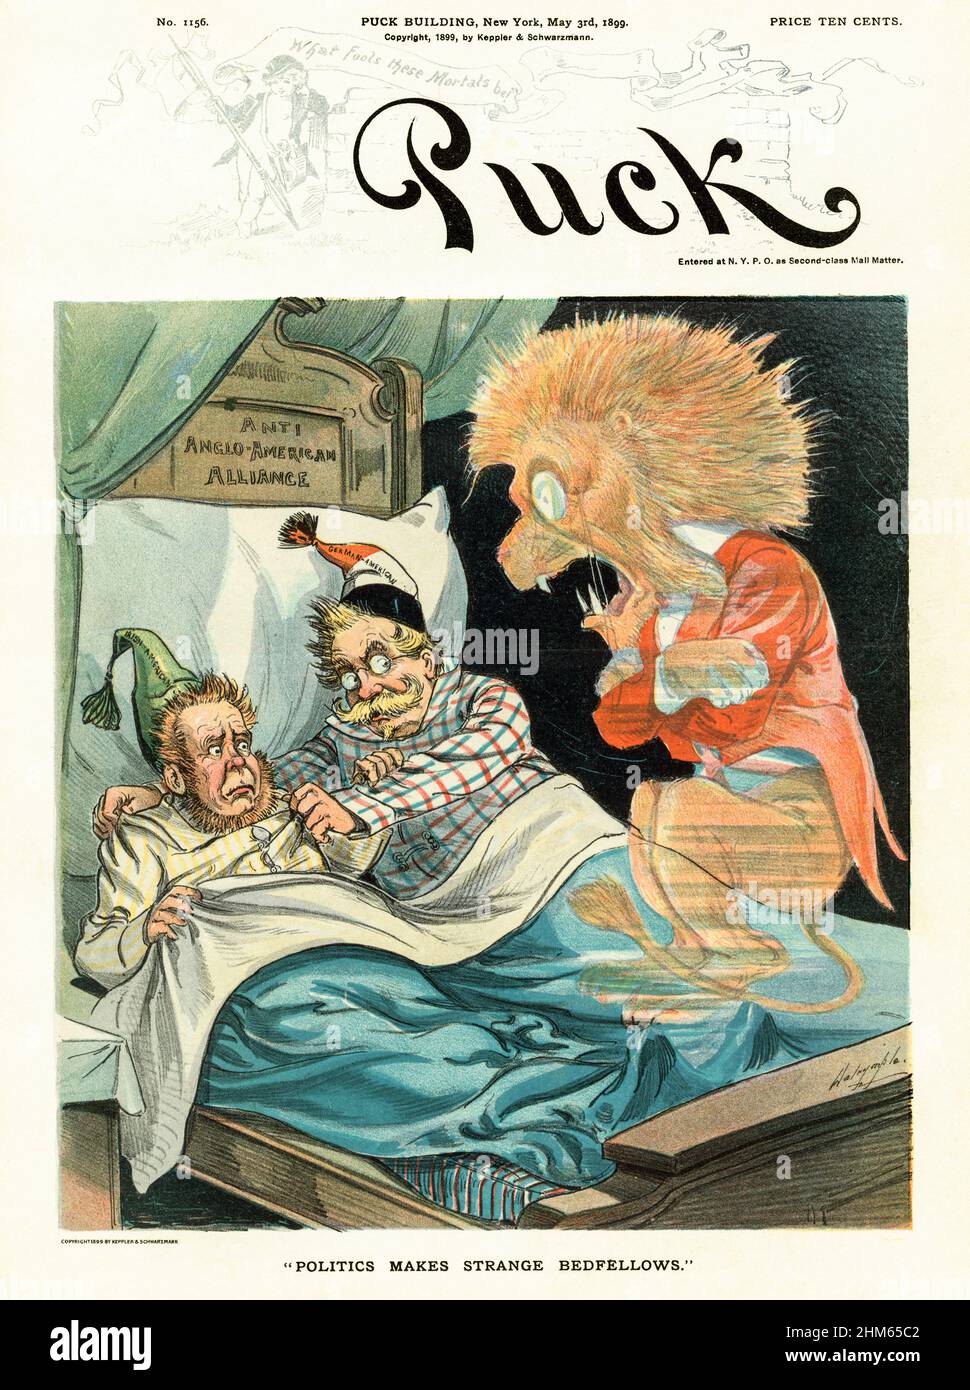 A late 19th century American Puck Magazine cover with a cartoon of the ghost of the British Lion reacting with fear at finding an 'Irish American' and a 'German American' in a bed labelled 'Anti Anglo-American Alliance'. Stock Photo